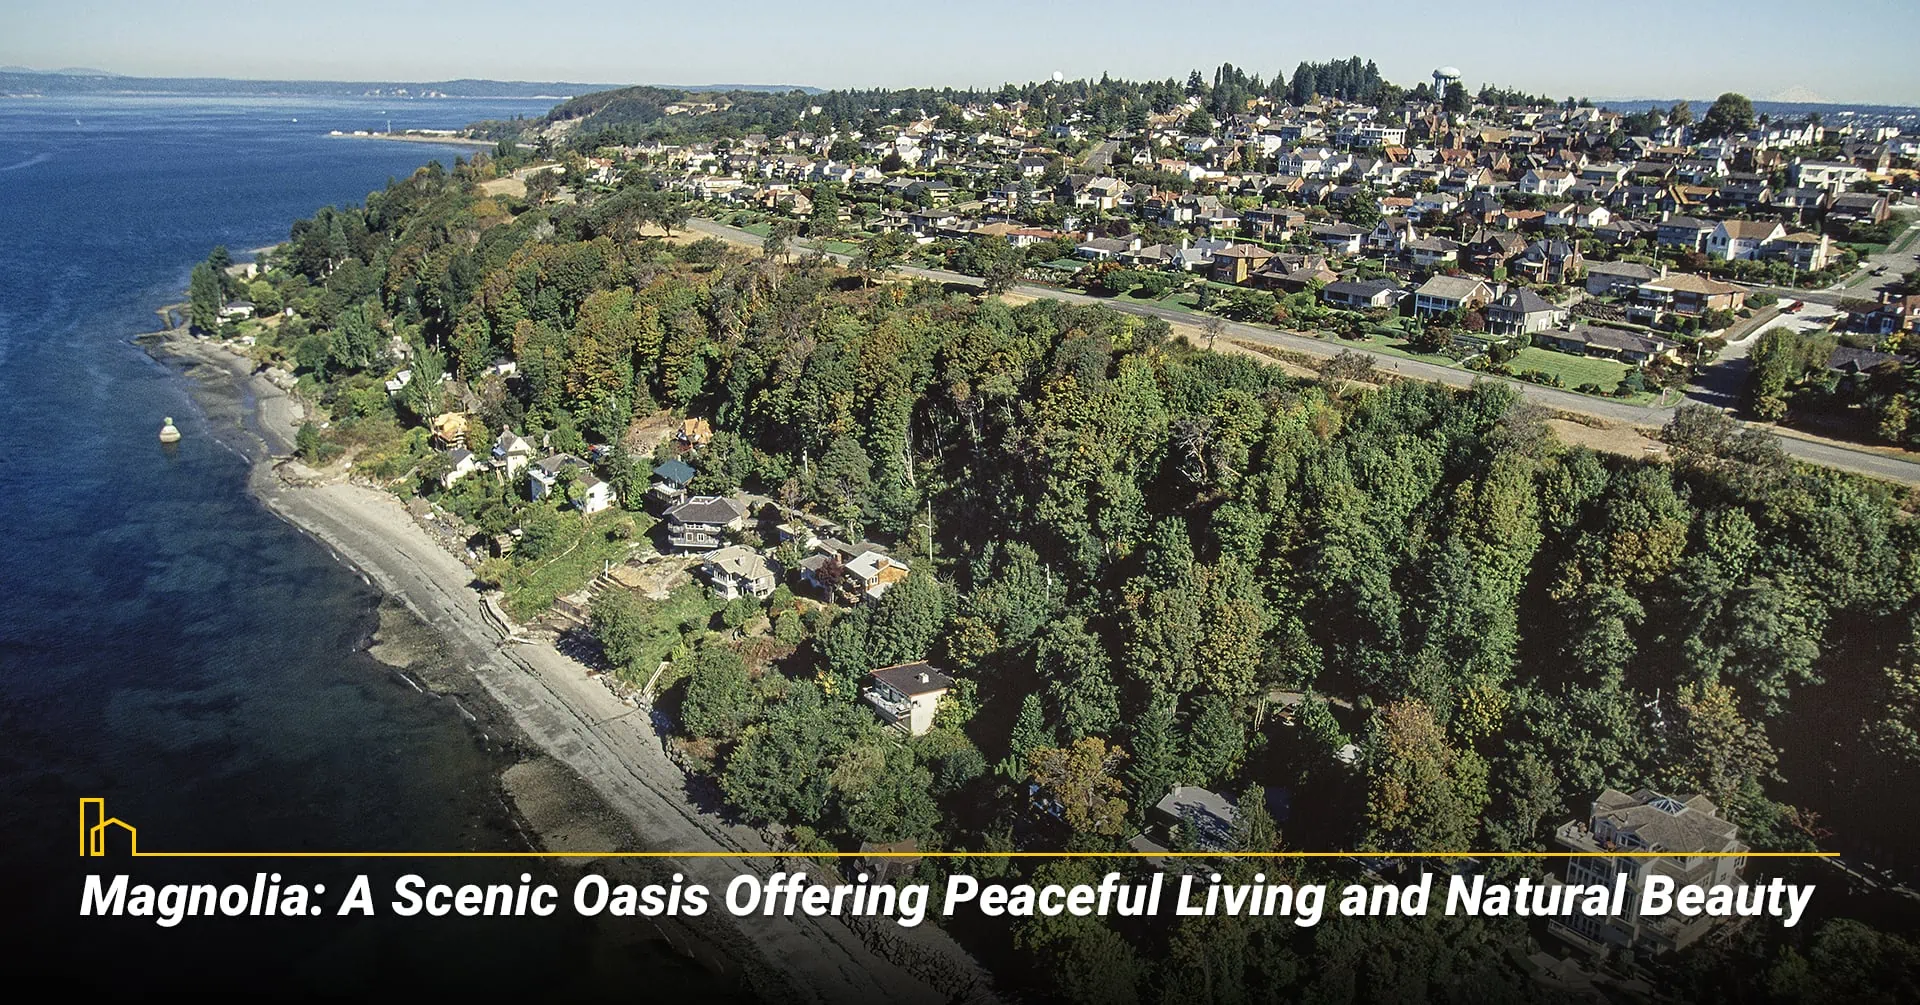 Magnolia: A Scenic Oasis Offering Peaceful Living and Natural Beauty